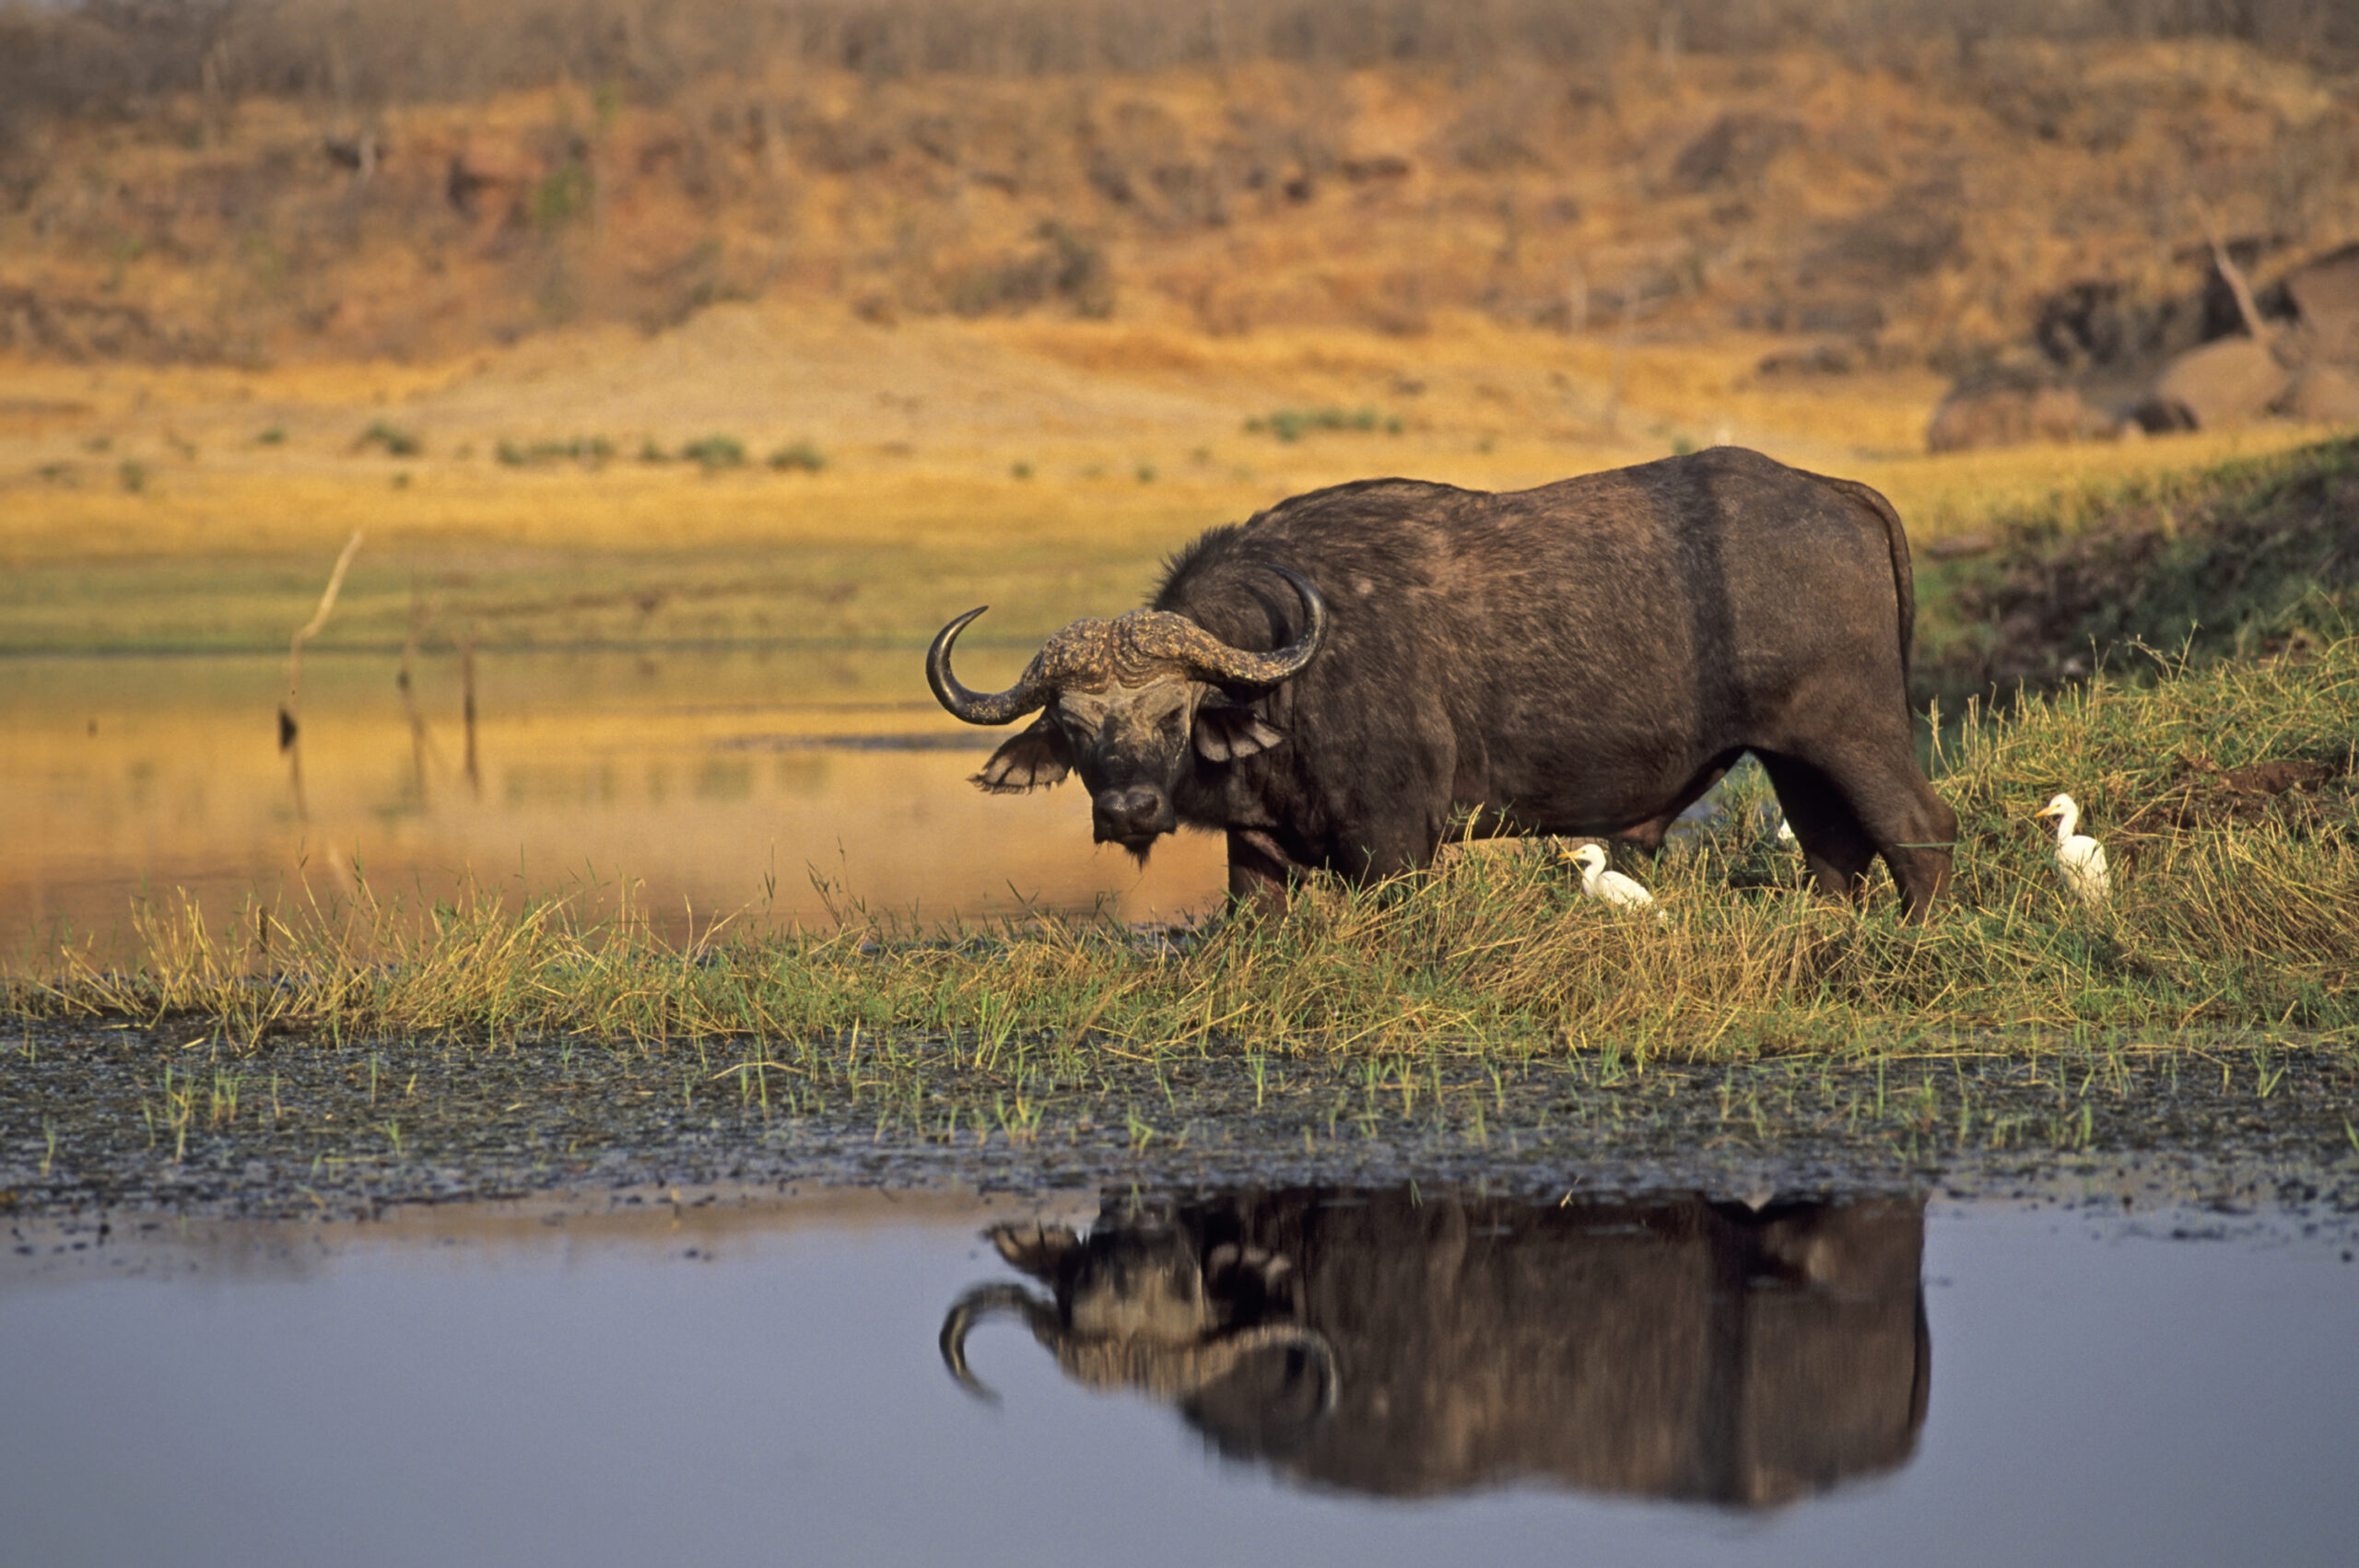 Cape buffalo | The Big Five" Animals You Will See in an African Safari